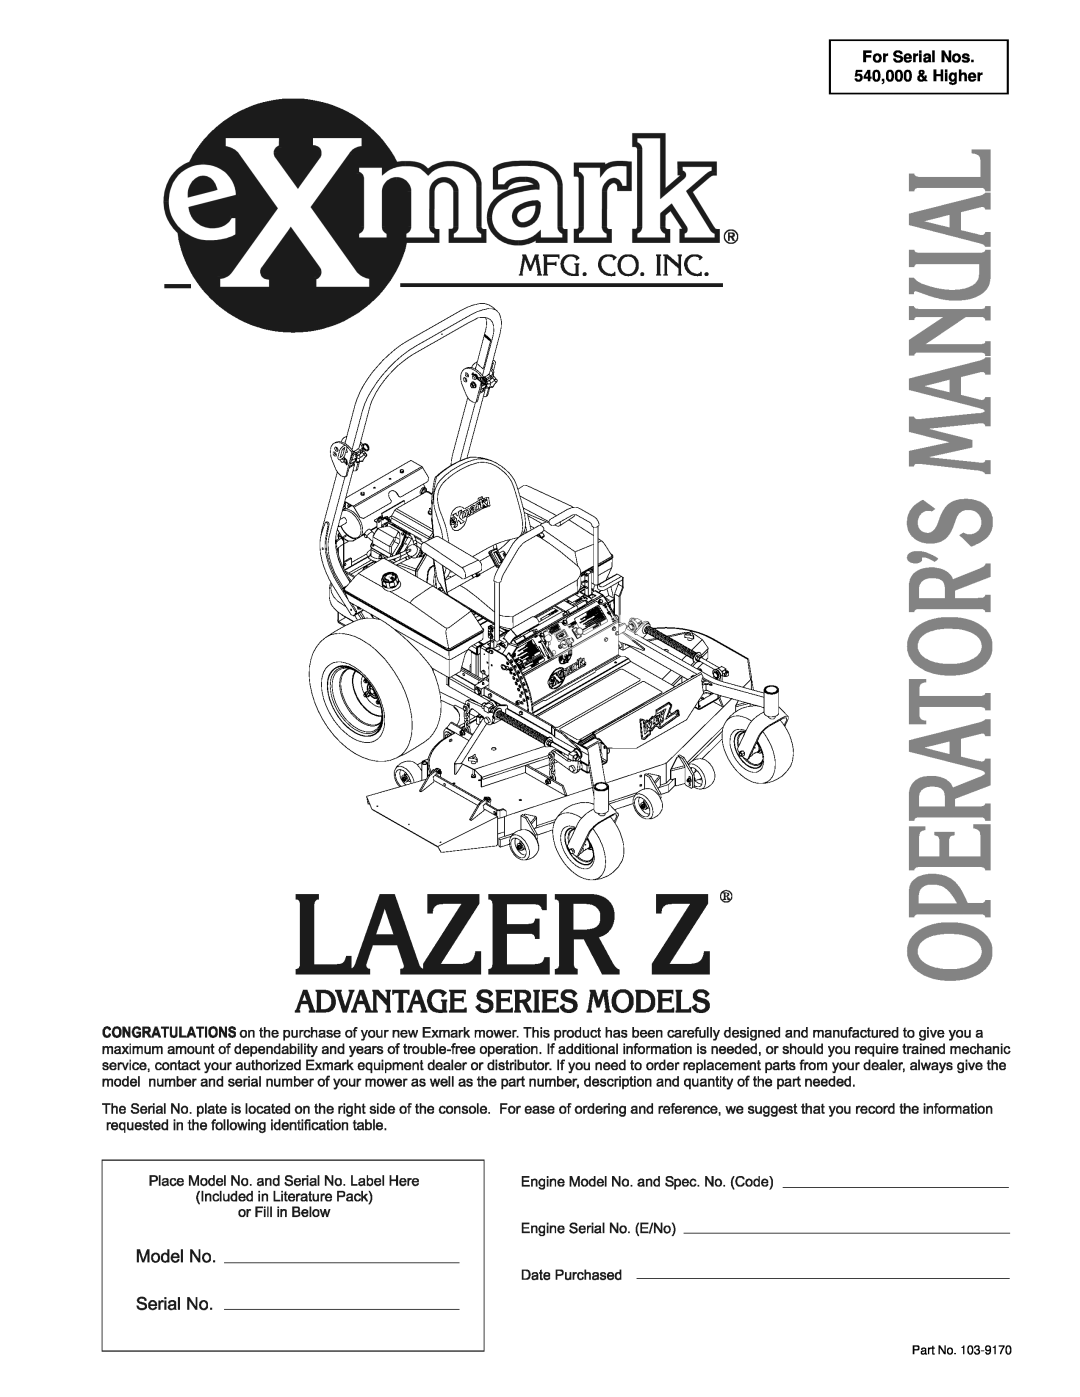 Exmark Lawn Tractor manual For Serial Nos 540,000 & Higher 